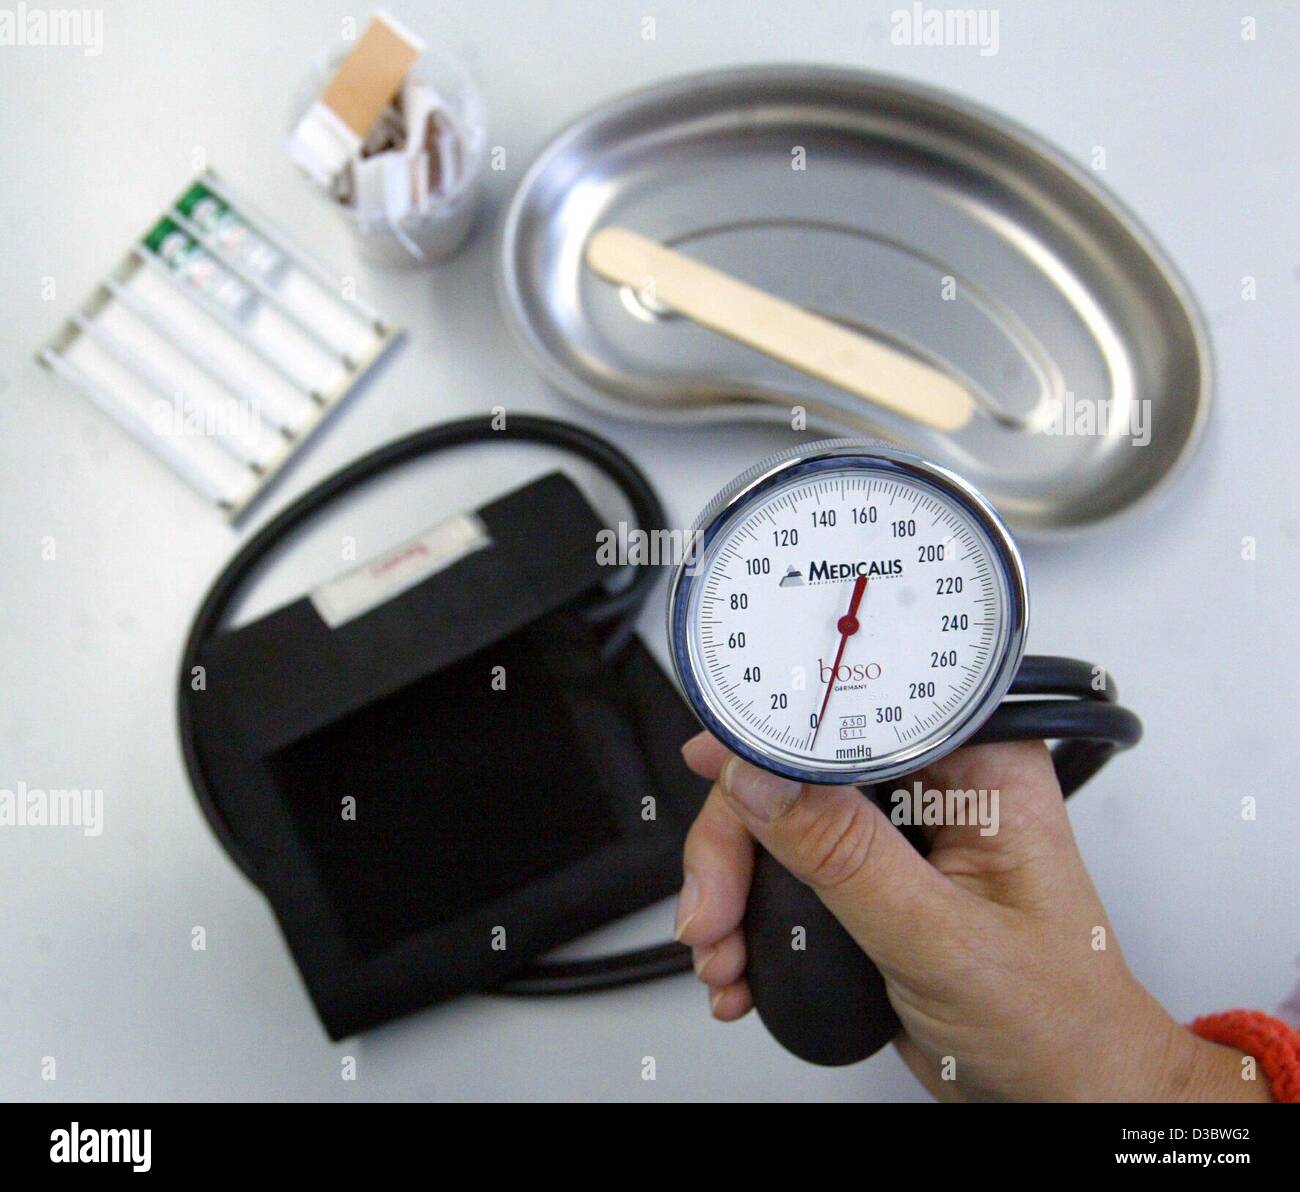 (dpa) - A hand shows a blood pressure meter at a doctor's practice in Magdeburg, Germany, 21 August 2003. The envisaged healthcare reform of the German government will result in deep cuts in the health and welfare systems. Germany's expensive healthcare system which is funded entirely by levies on p Stock Photo